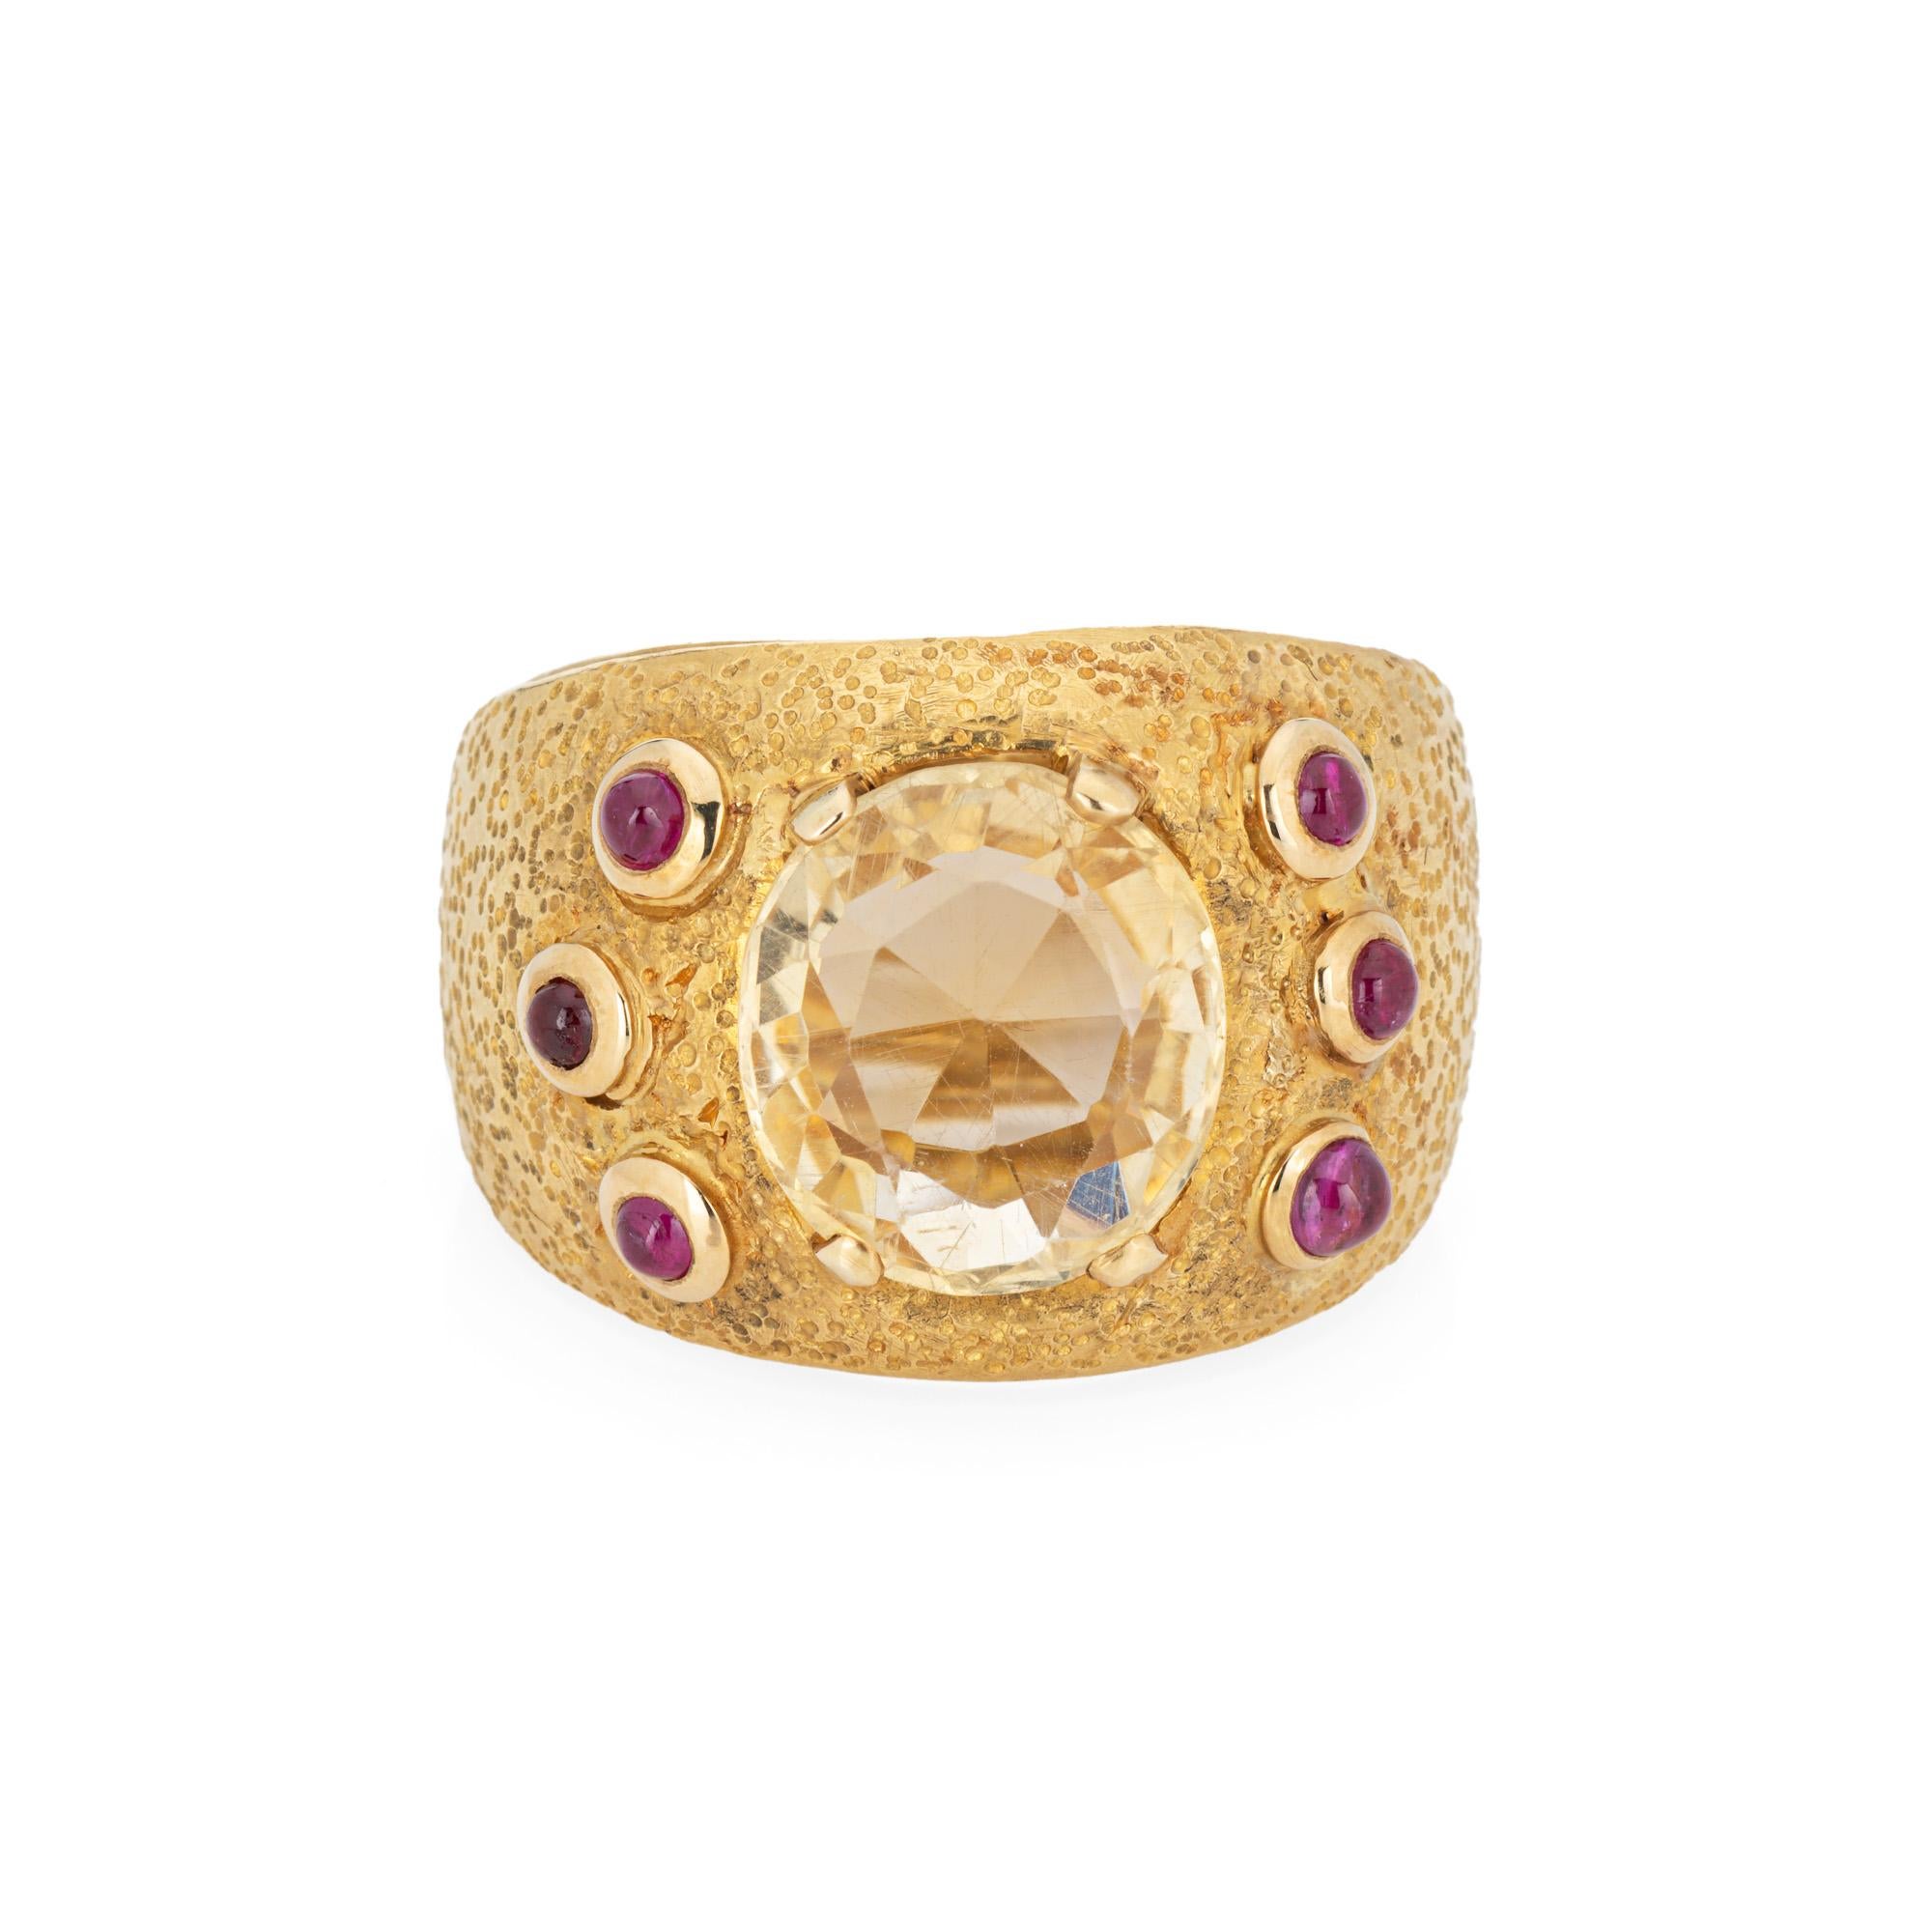 Finely detailed vintage Louis Feron citrine & ruby ring crafted in 18 karat yellow gold (circa 1960s). 

Centrally round citrine measures 12.5mm (estimated at 5 carats). Six cabochon cut rubies measure 2mm each. The gemstones are in very good